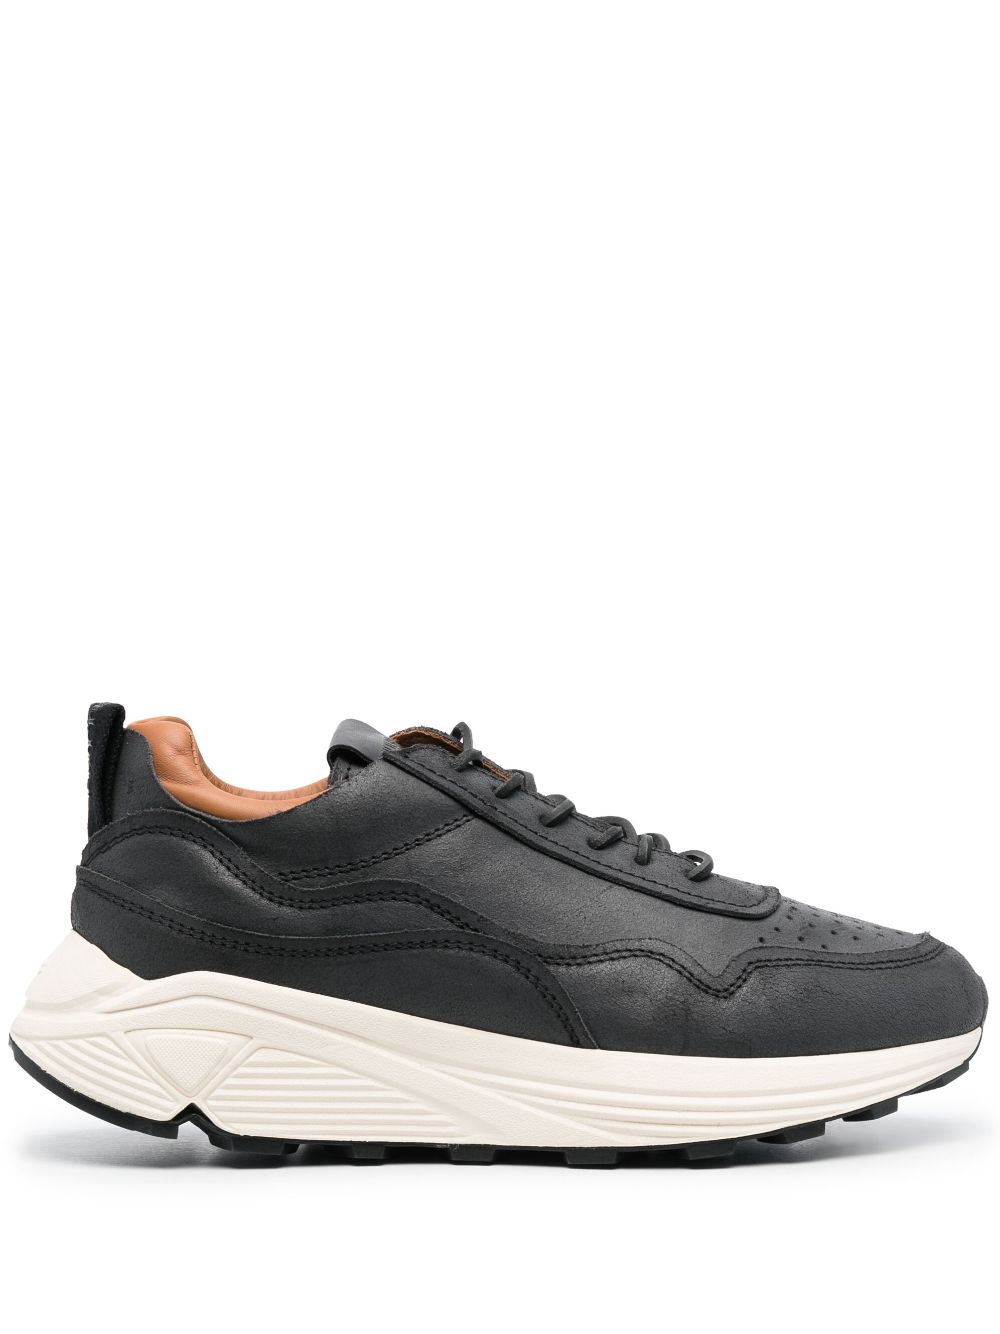 BUTTERO VINCI LOW-TOP LEATHER SNEAKERS